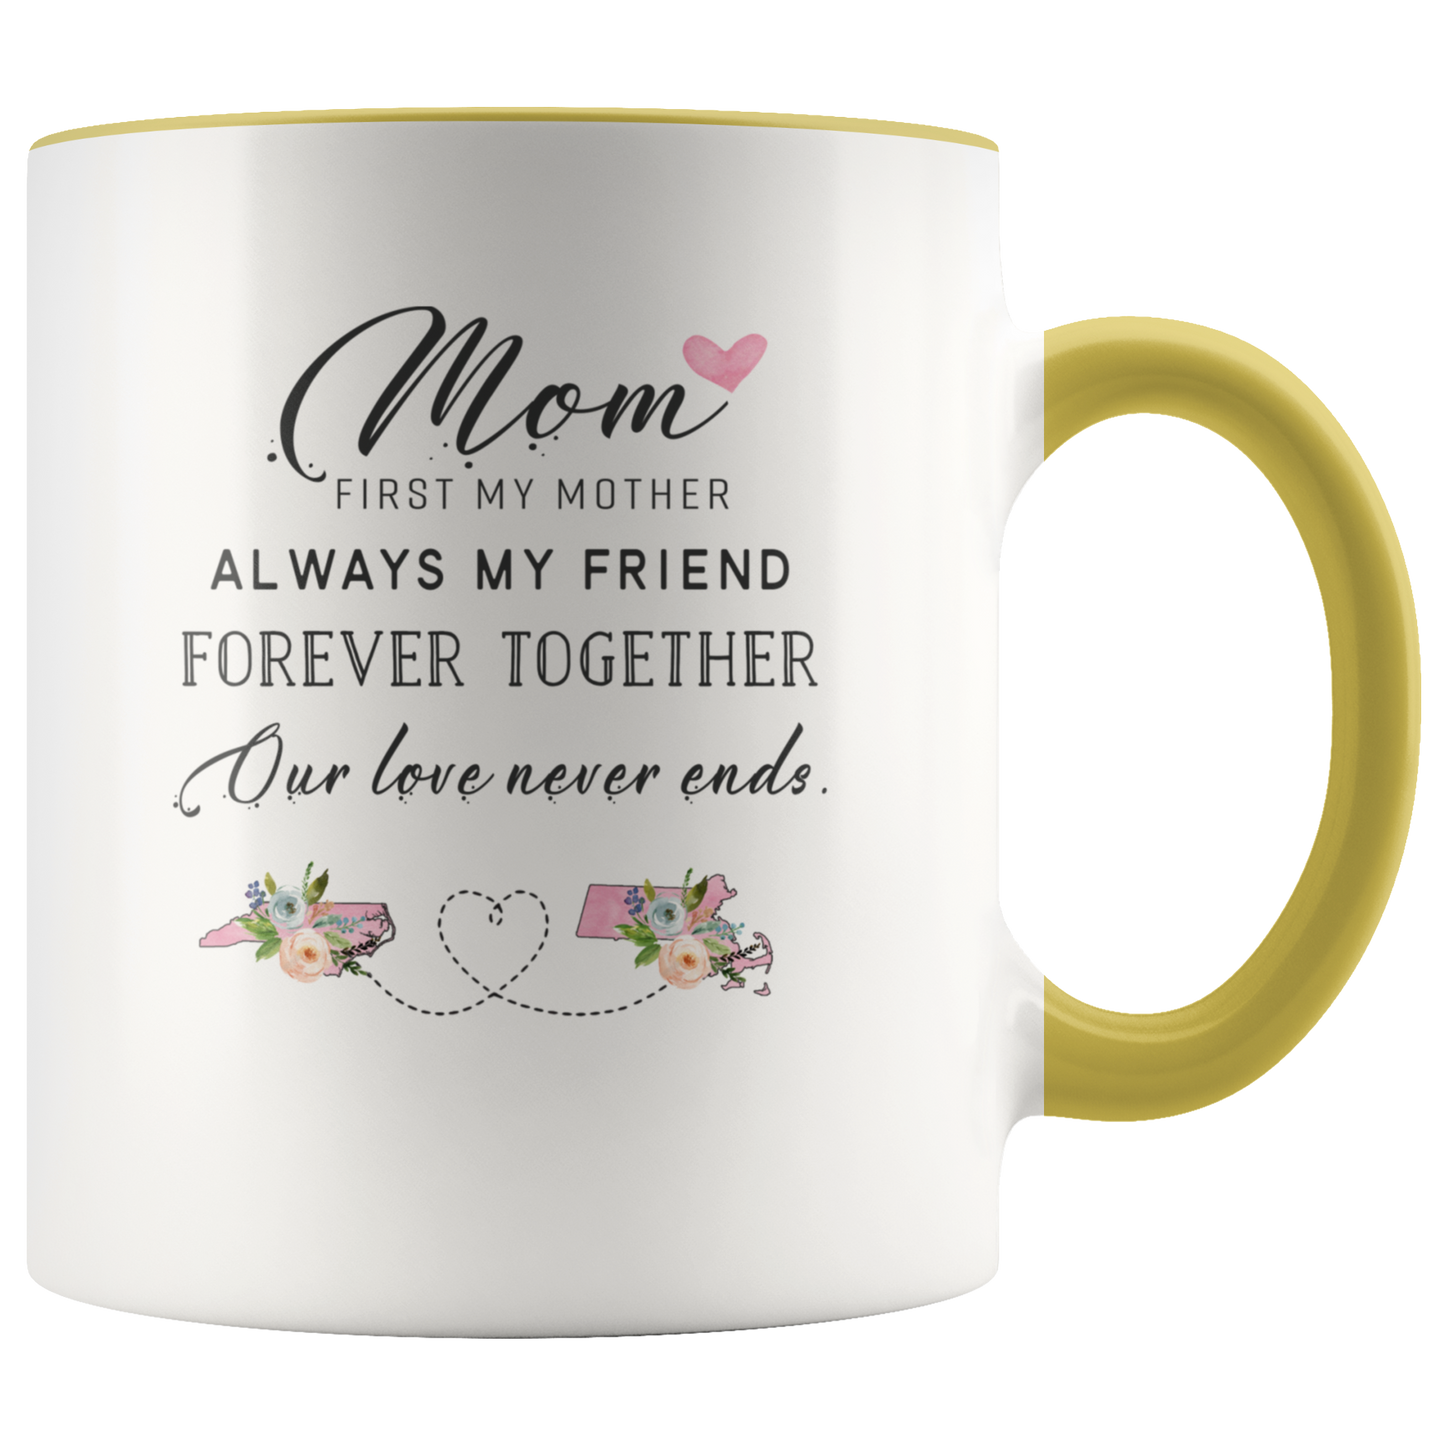 ND-21359198-sp-23808 - [ North Carolina | Massachusetts ]Mothers Day Accent Mug Red - Mom, First My Mother Always My